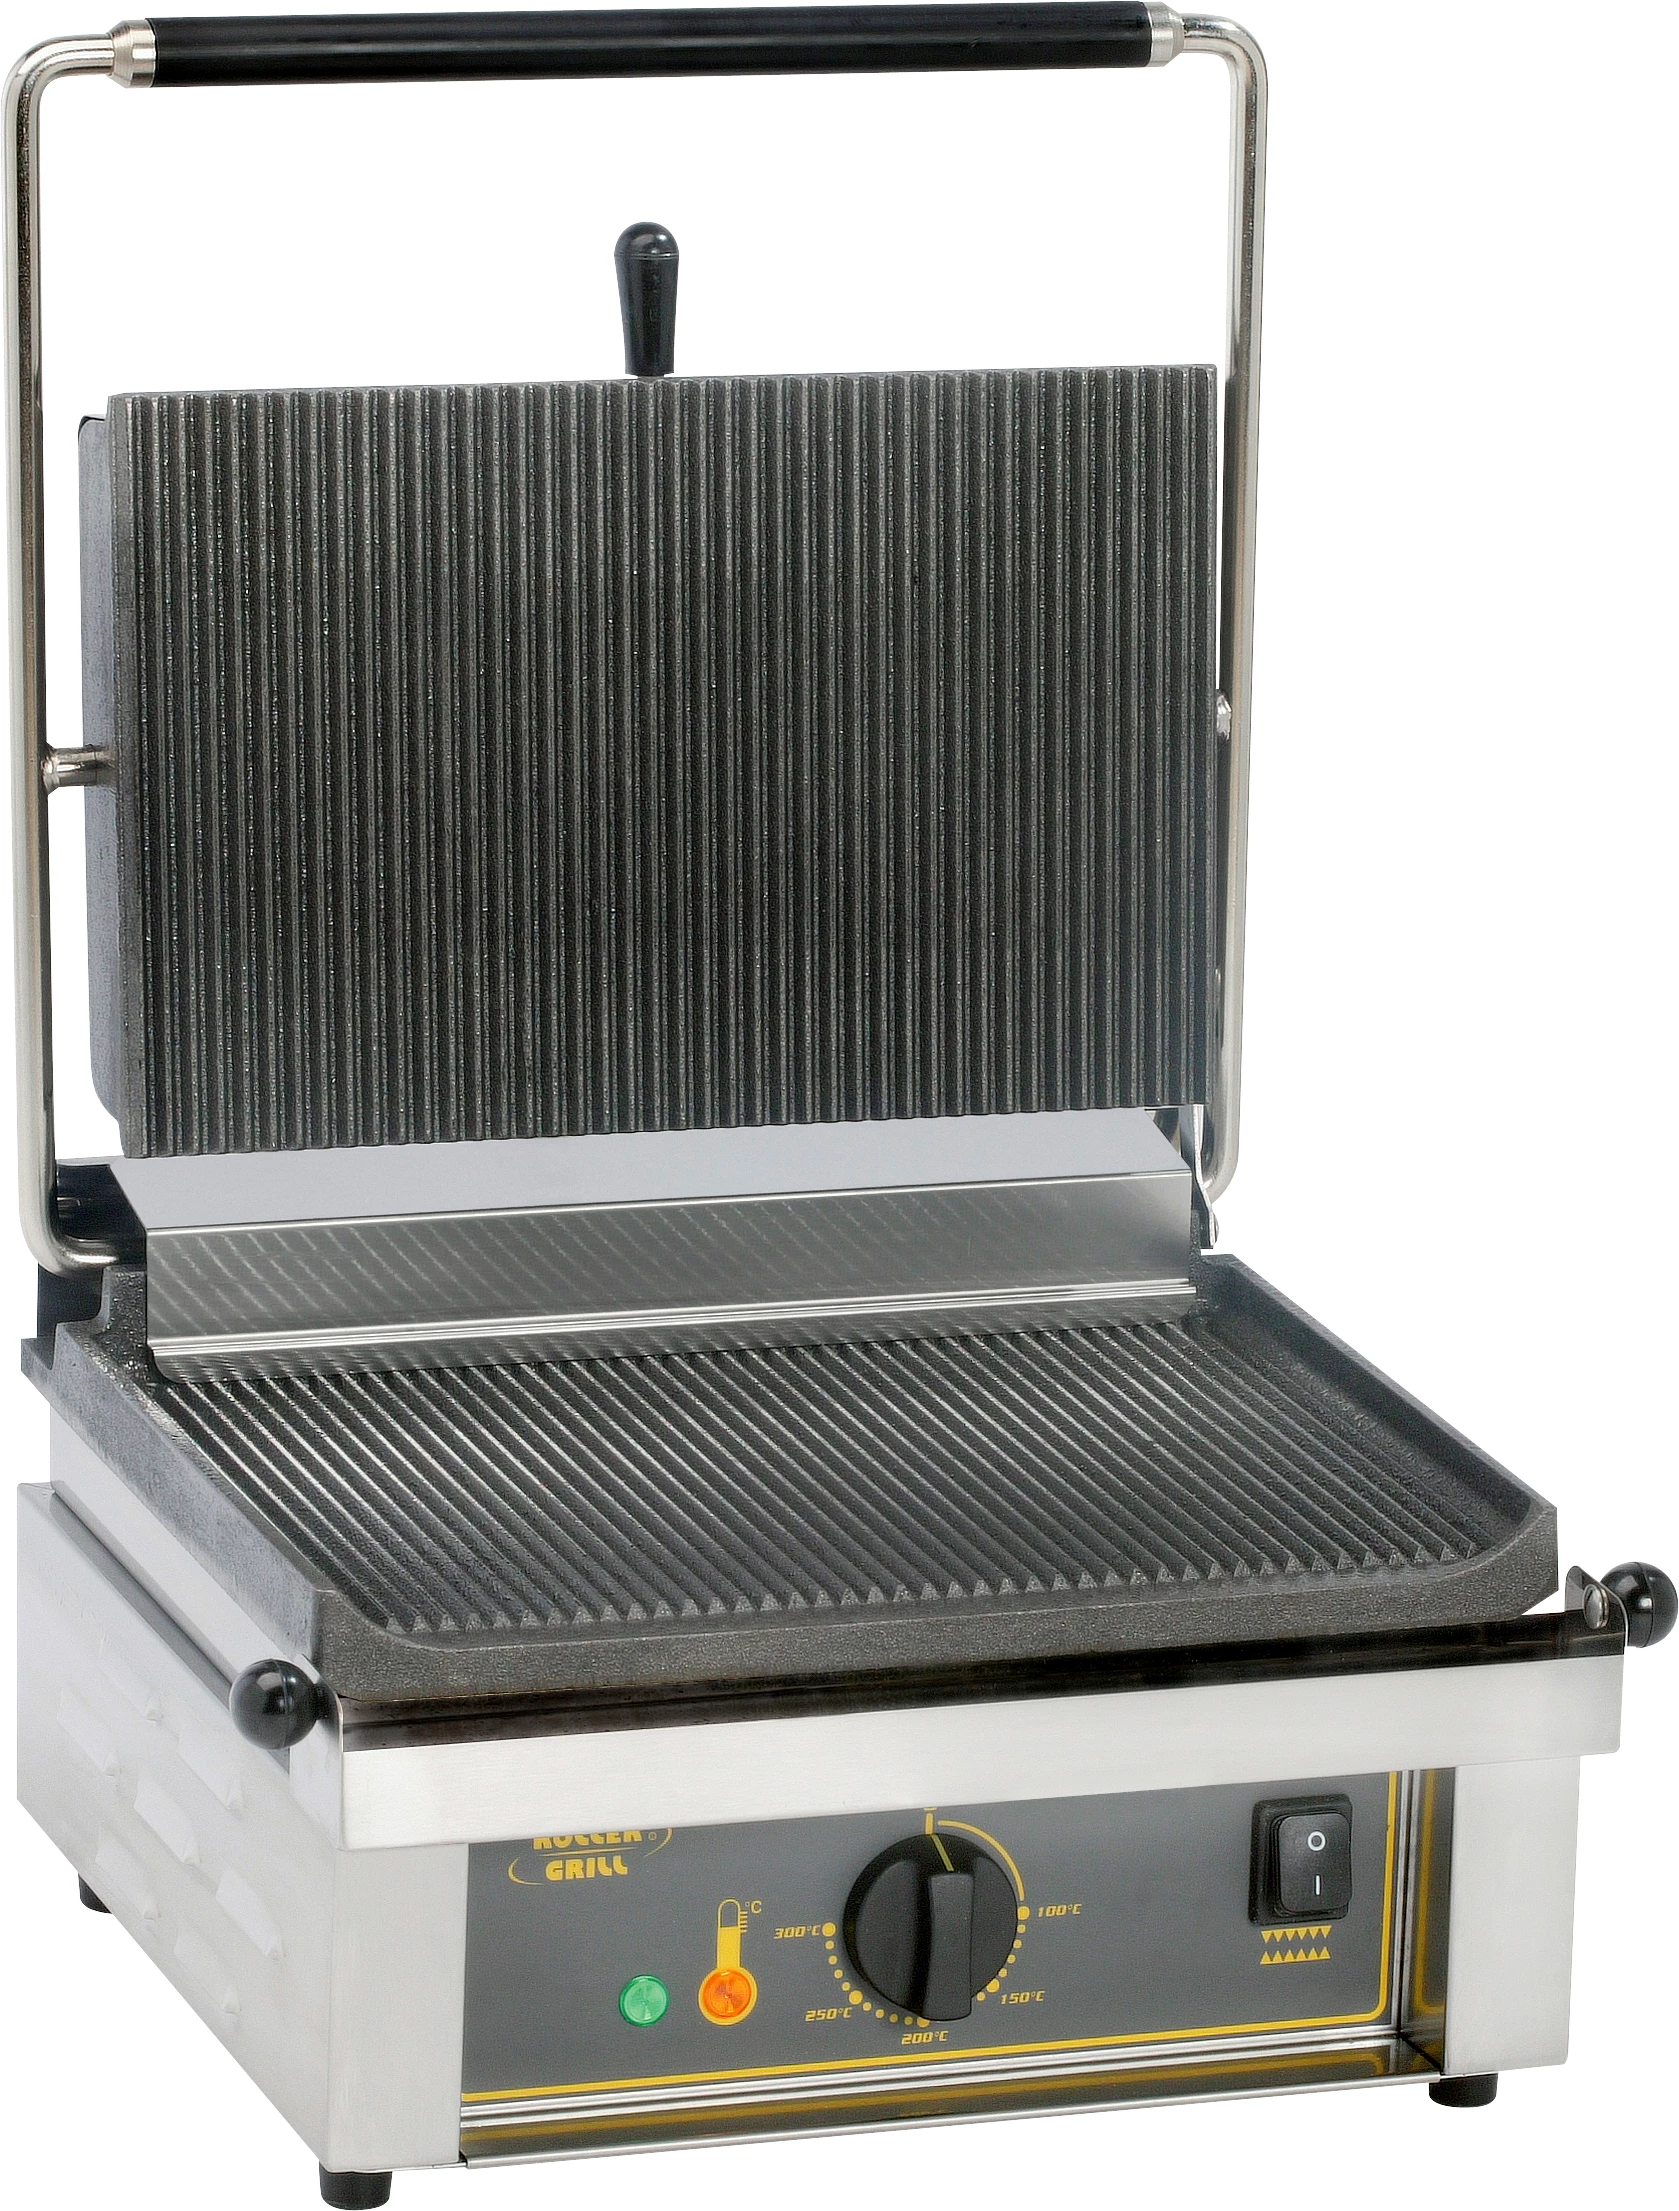 Roller Grill klemgrill (panini)